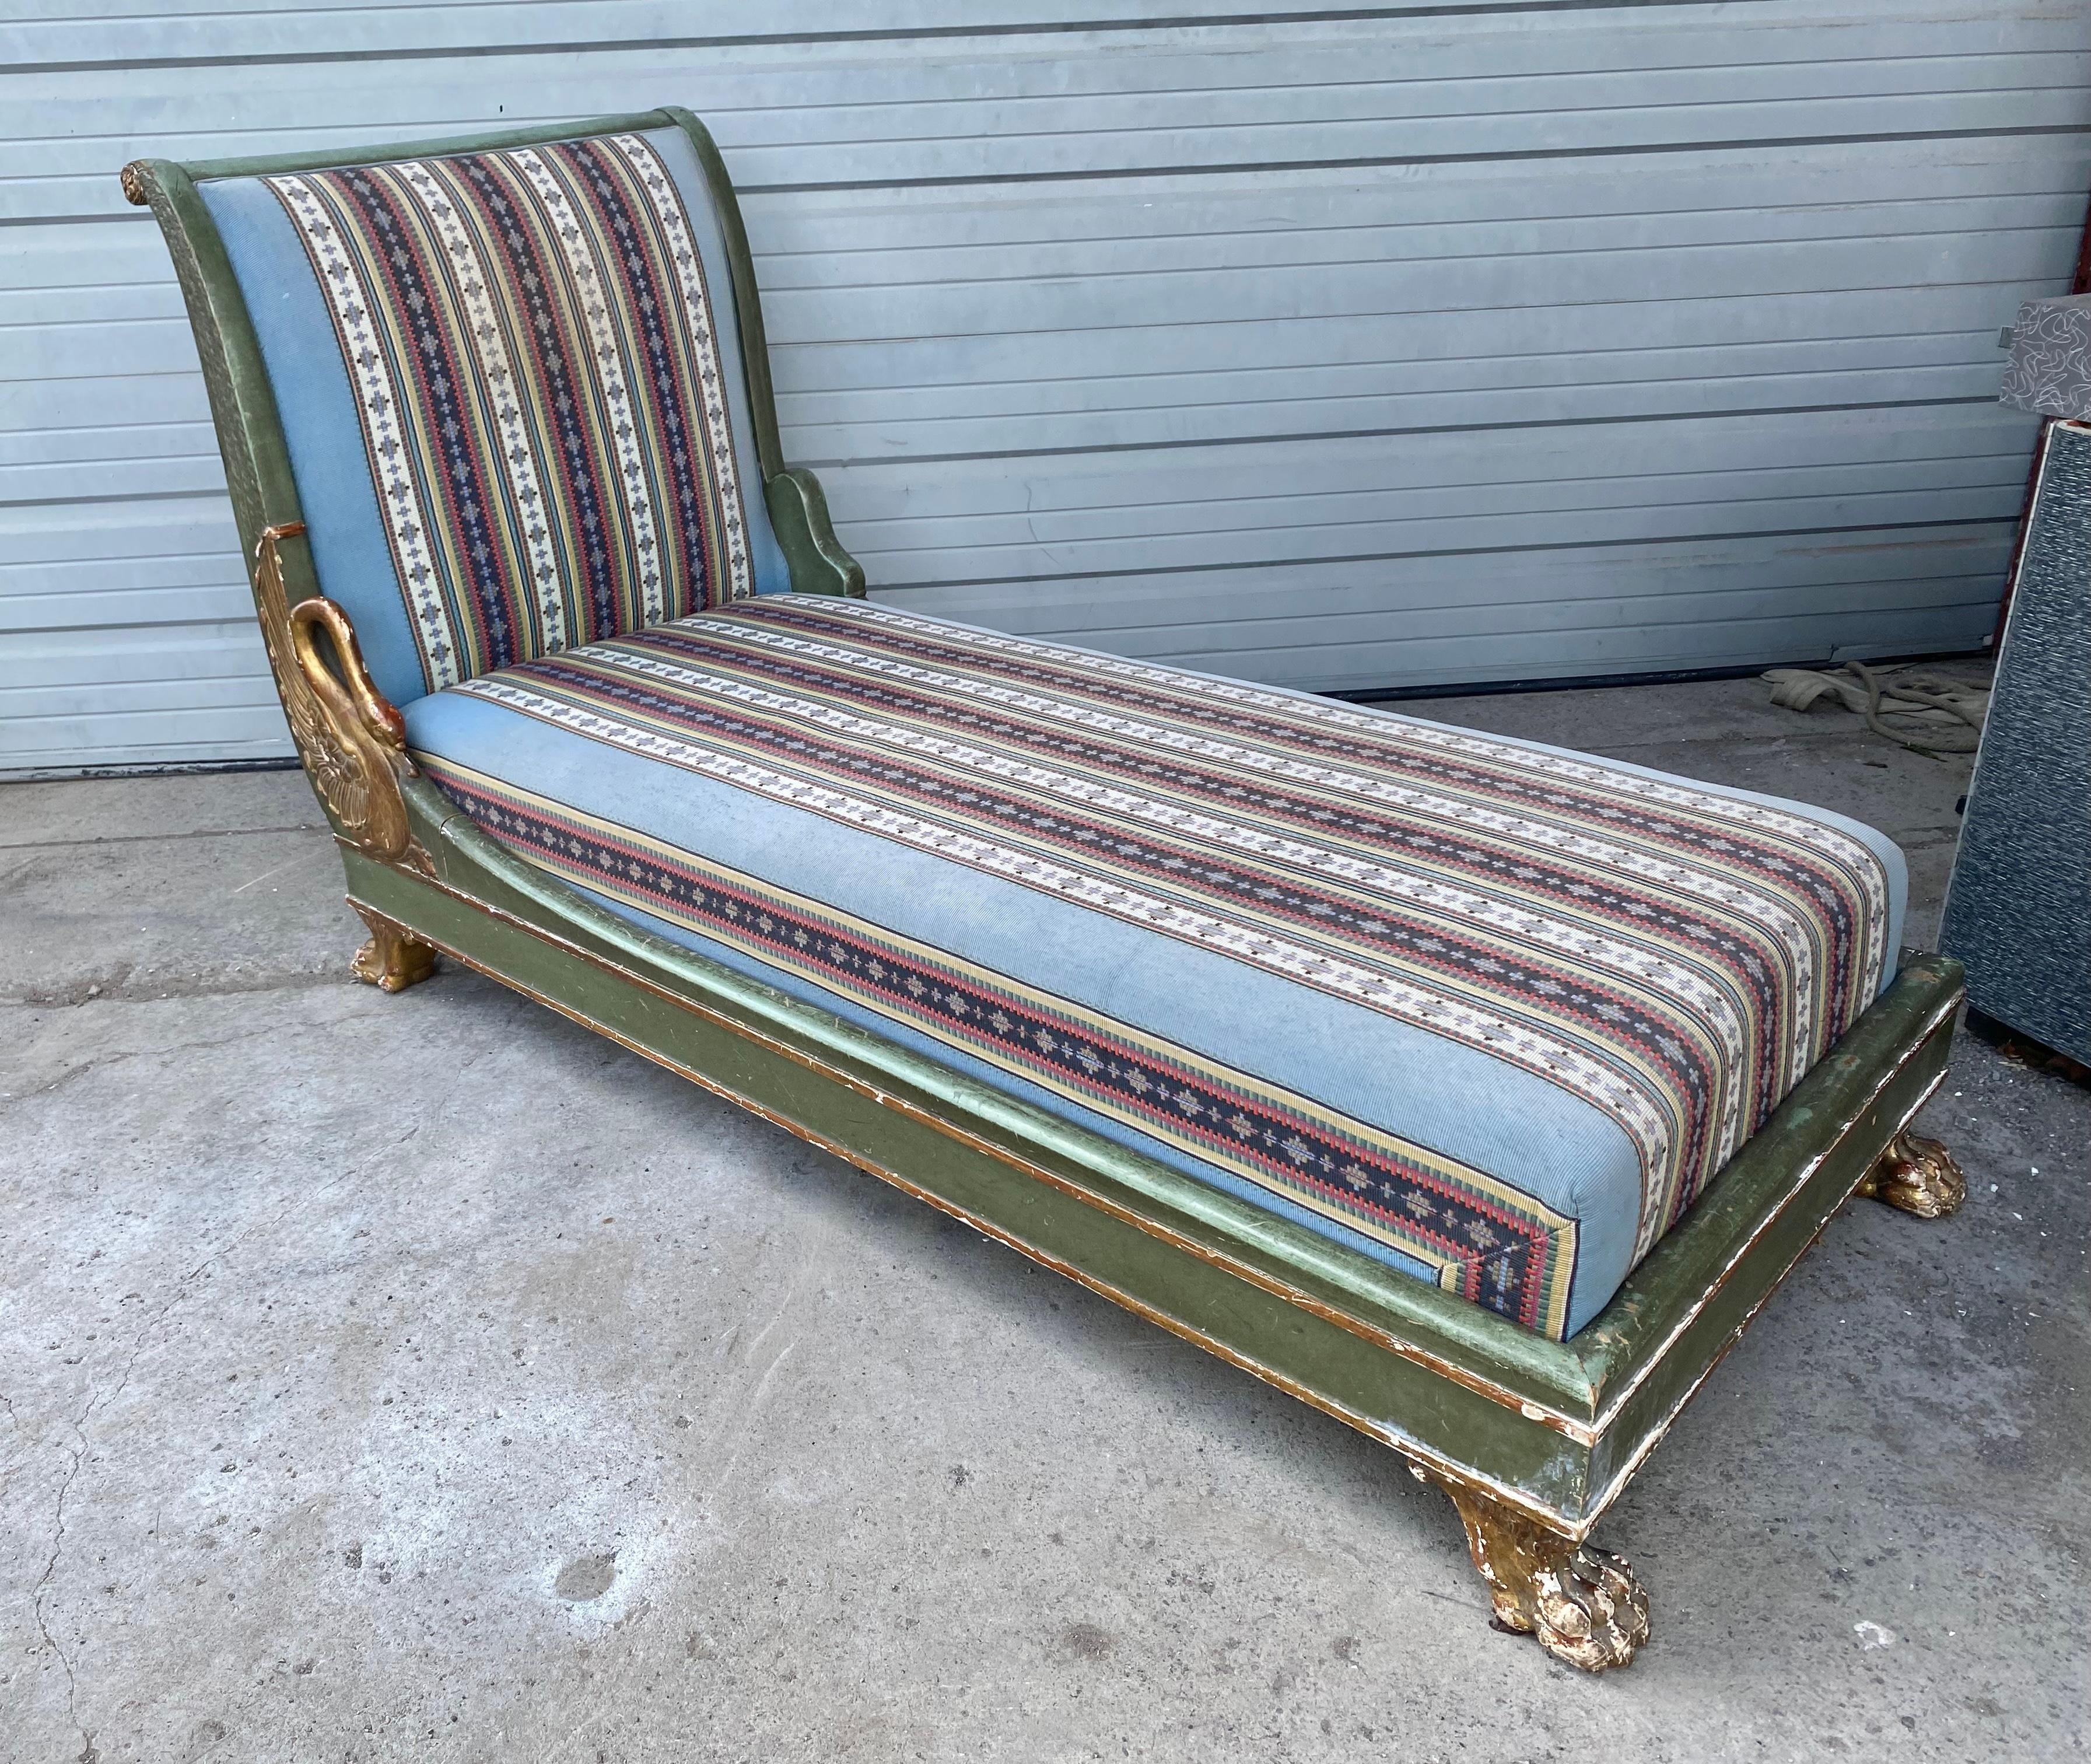 Wonderful French Empire Daybed / Chaise Lounge,,Great size and proportion. Carved and gilded swan to one side,,clawfeet and green painted frame.Upholstered in a multi-color geometric fabric,,Nice original condition .minimal wear throughout,